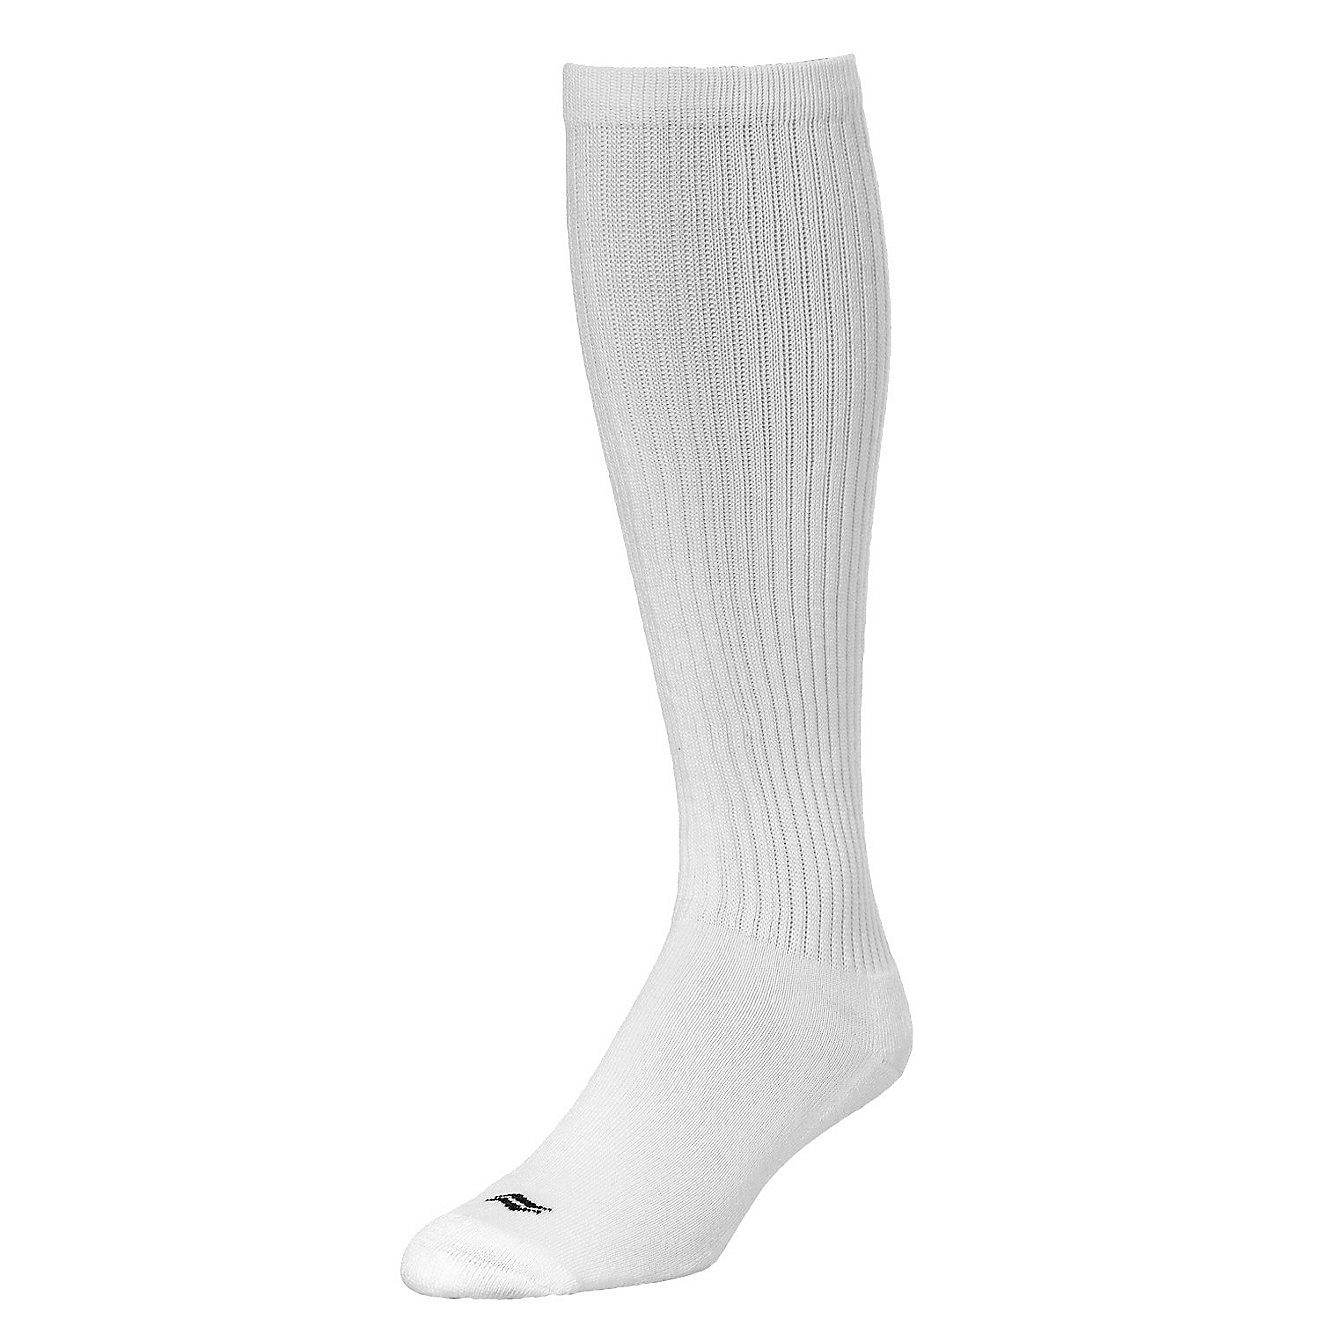 Sof Sole Team Men's Performance Football Socks 2 Pack                                                                            - view number 1